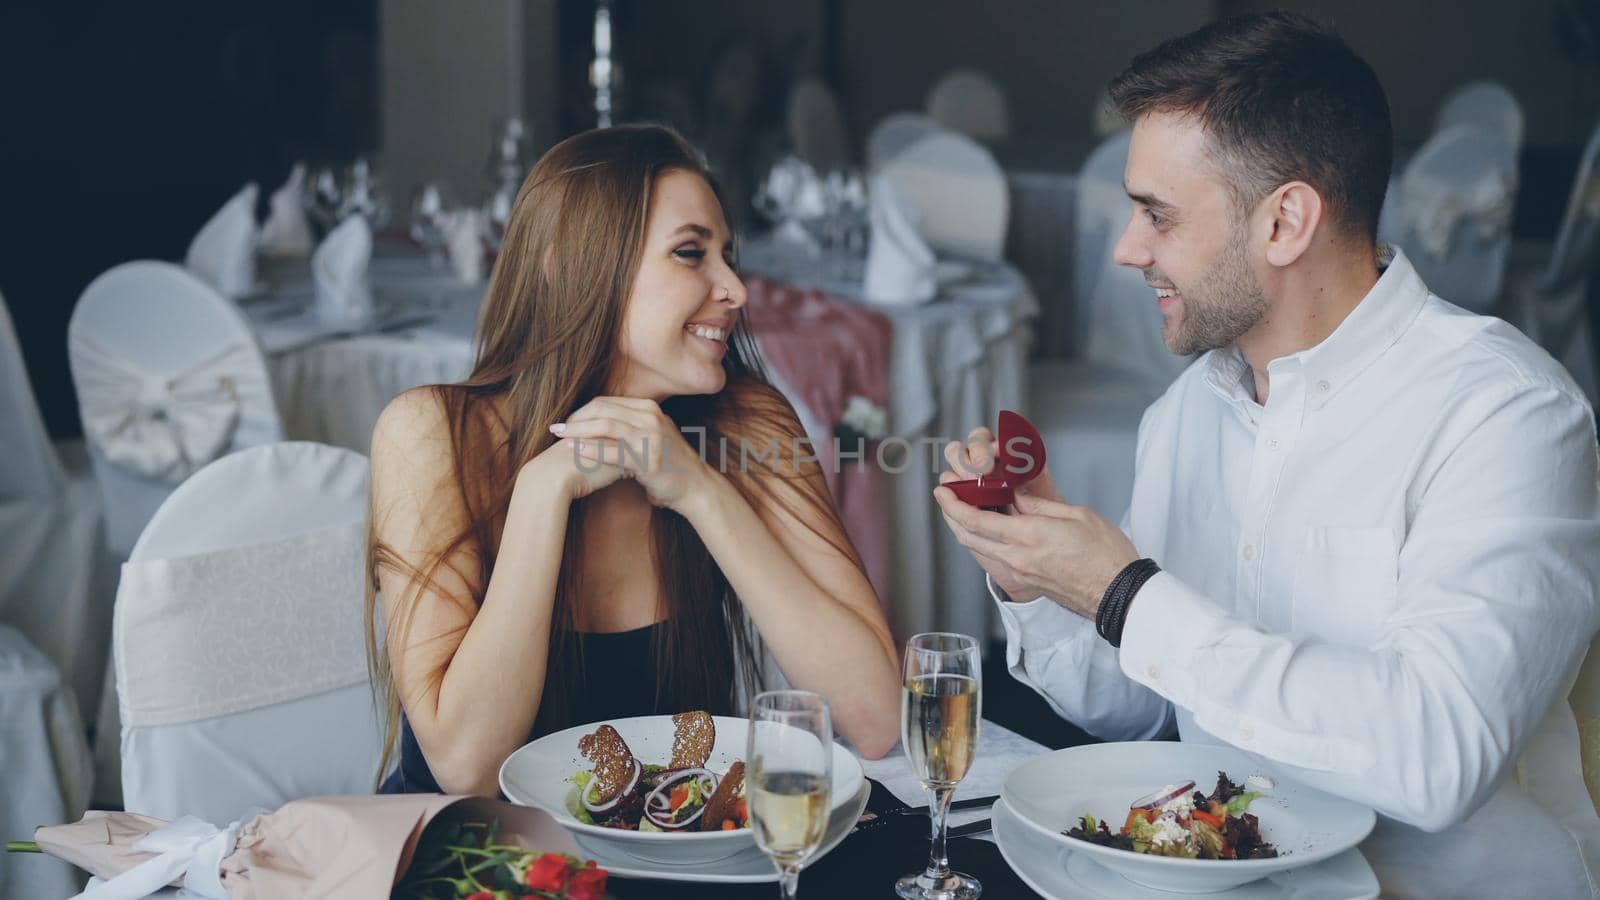 Attractive young woman is saying yes to marriage proposal. Romantic relationship and restaurant date concept.